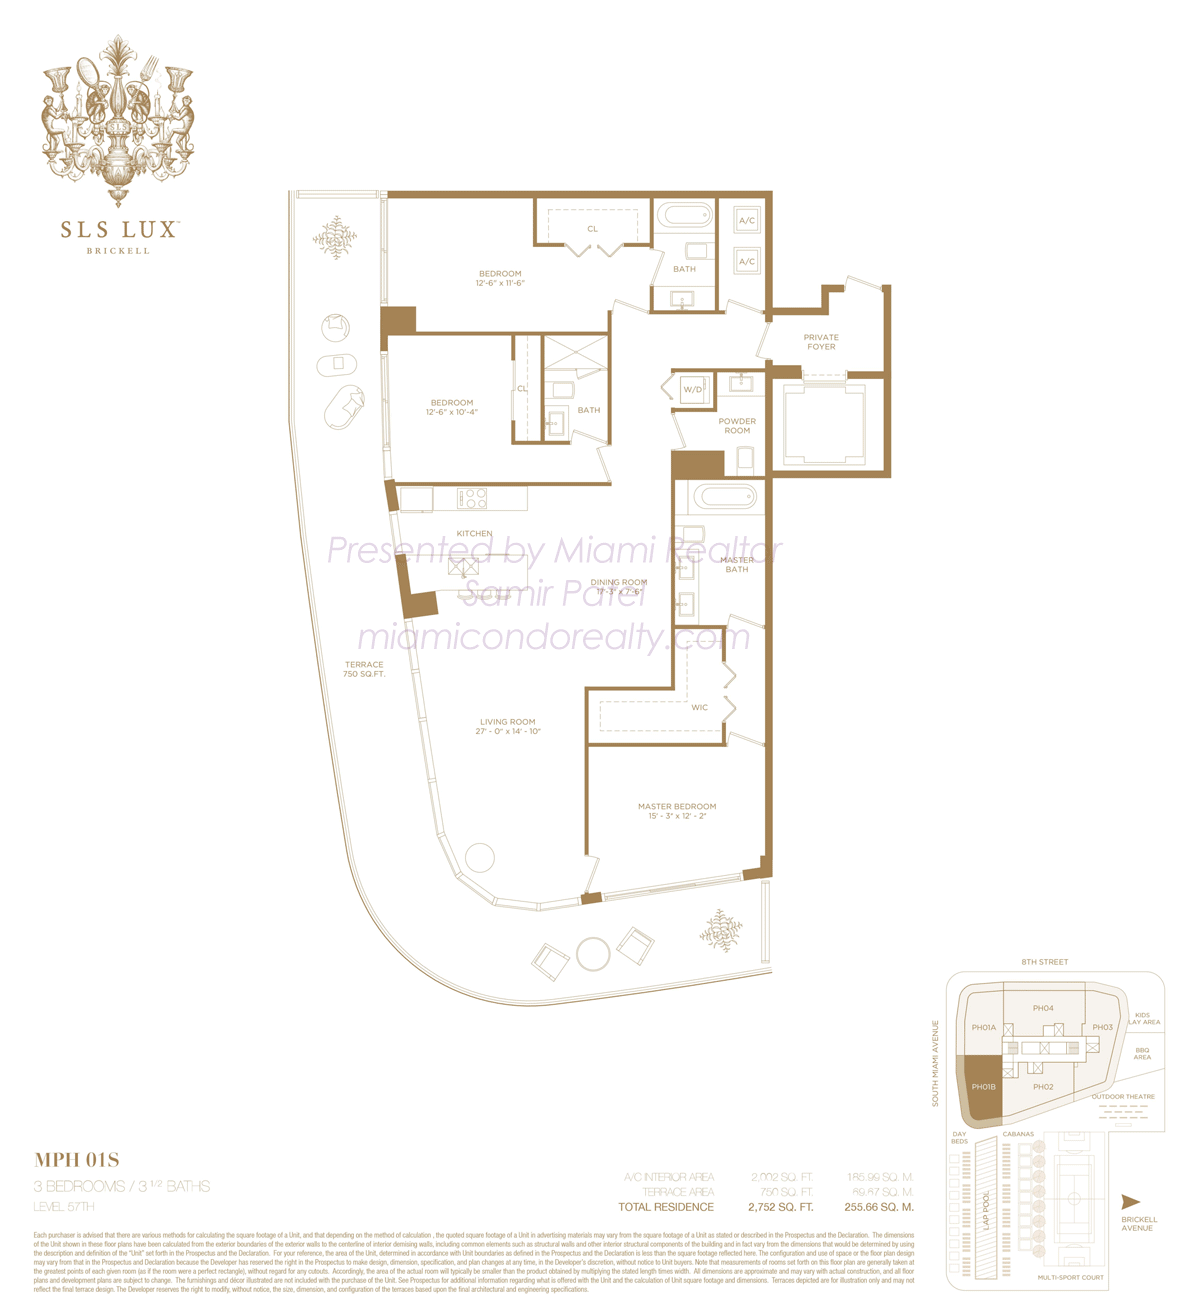 SLS LUX Brickell Middle Penthouse 01 South Floorplan